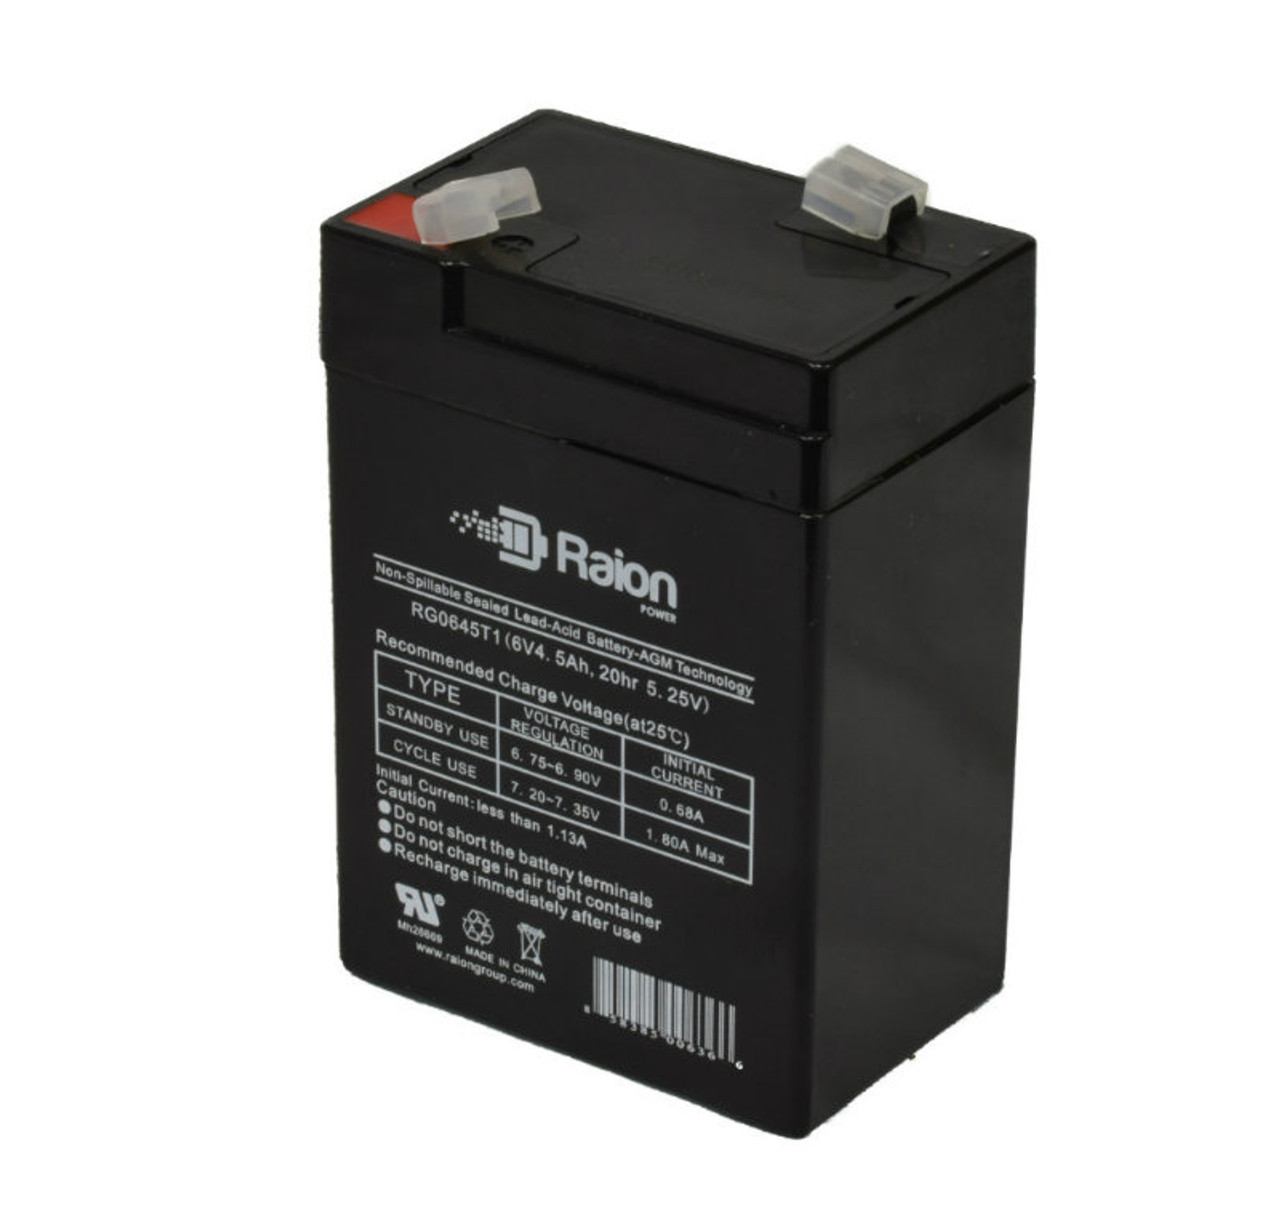 Raion Power RG0645T1 6V 4.5Ah Replacement Battery Cartridge for SeaWill SW650